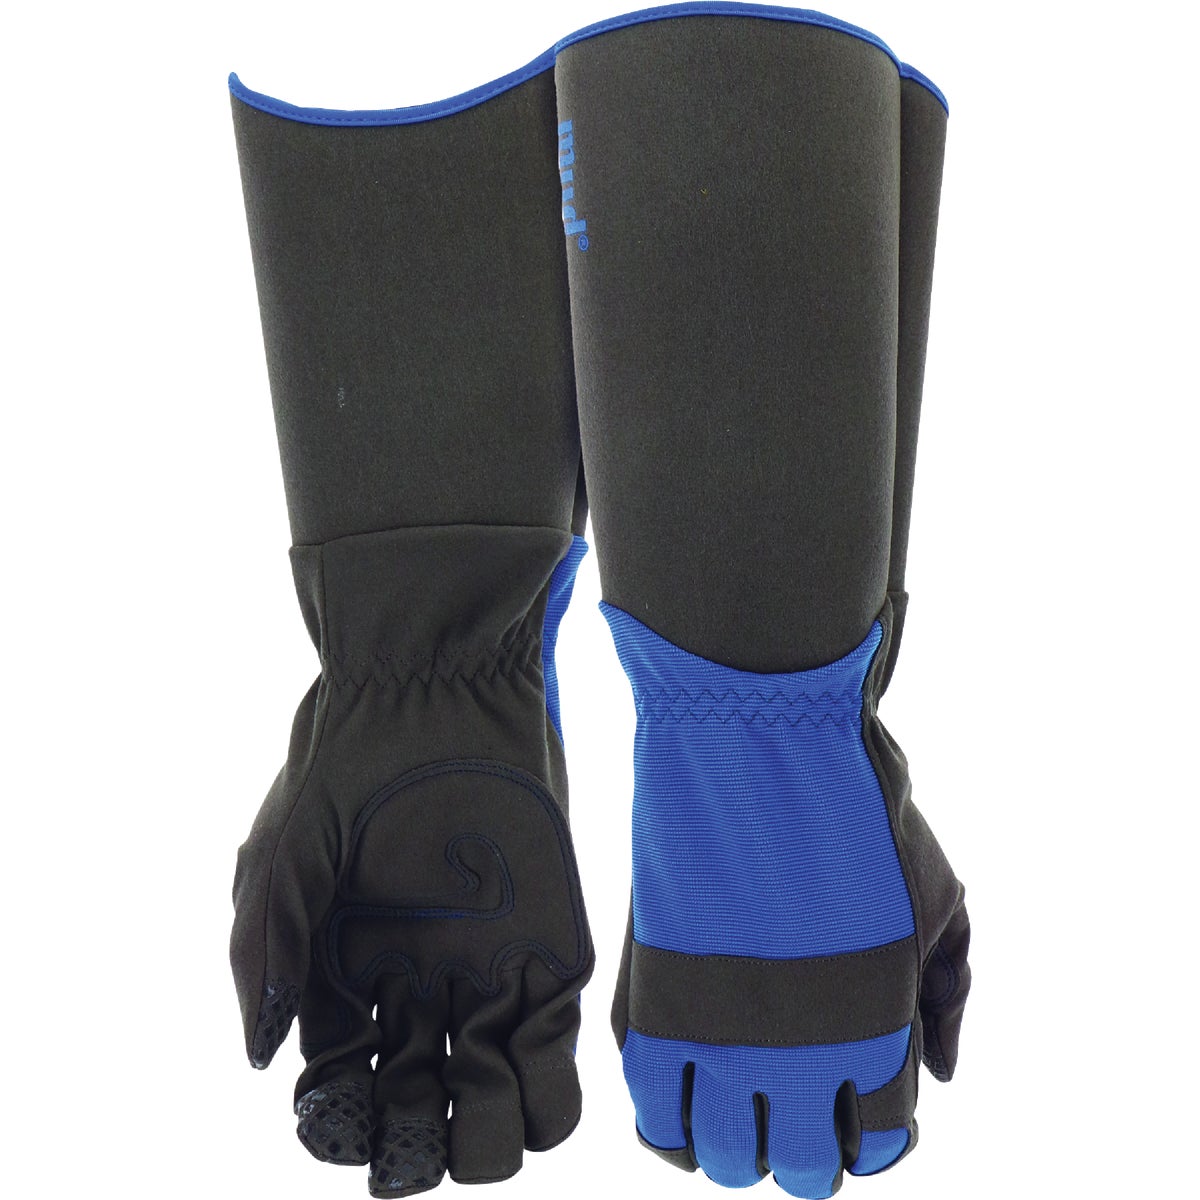 Mud Men's Medium/Large Brilliant Blue Synthetic Leather Palm Extended Sleeve Gauntlet Glove